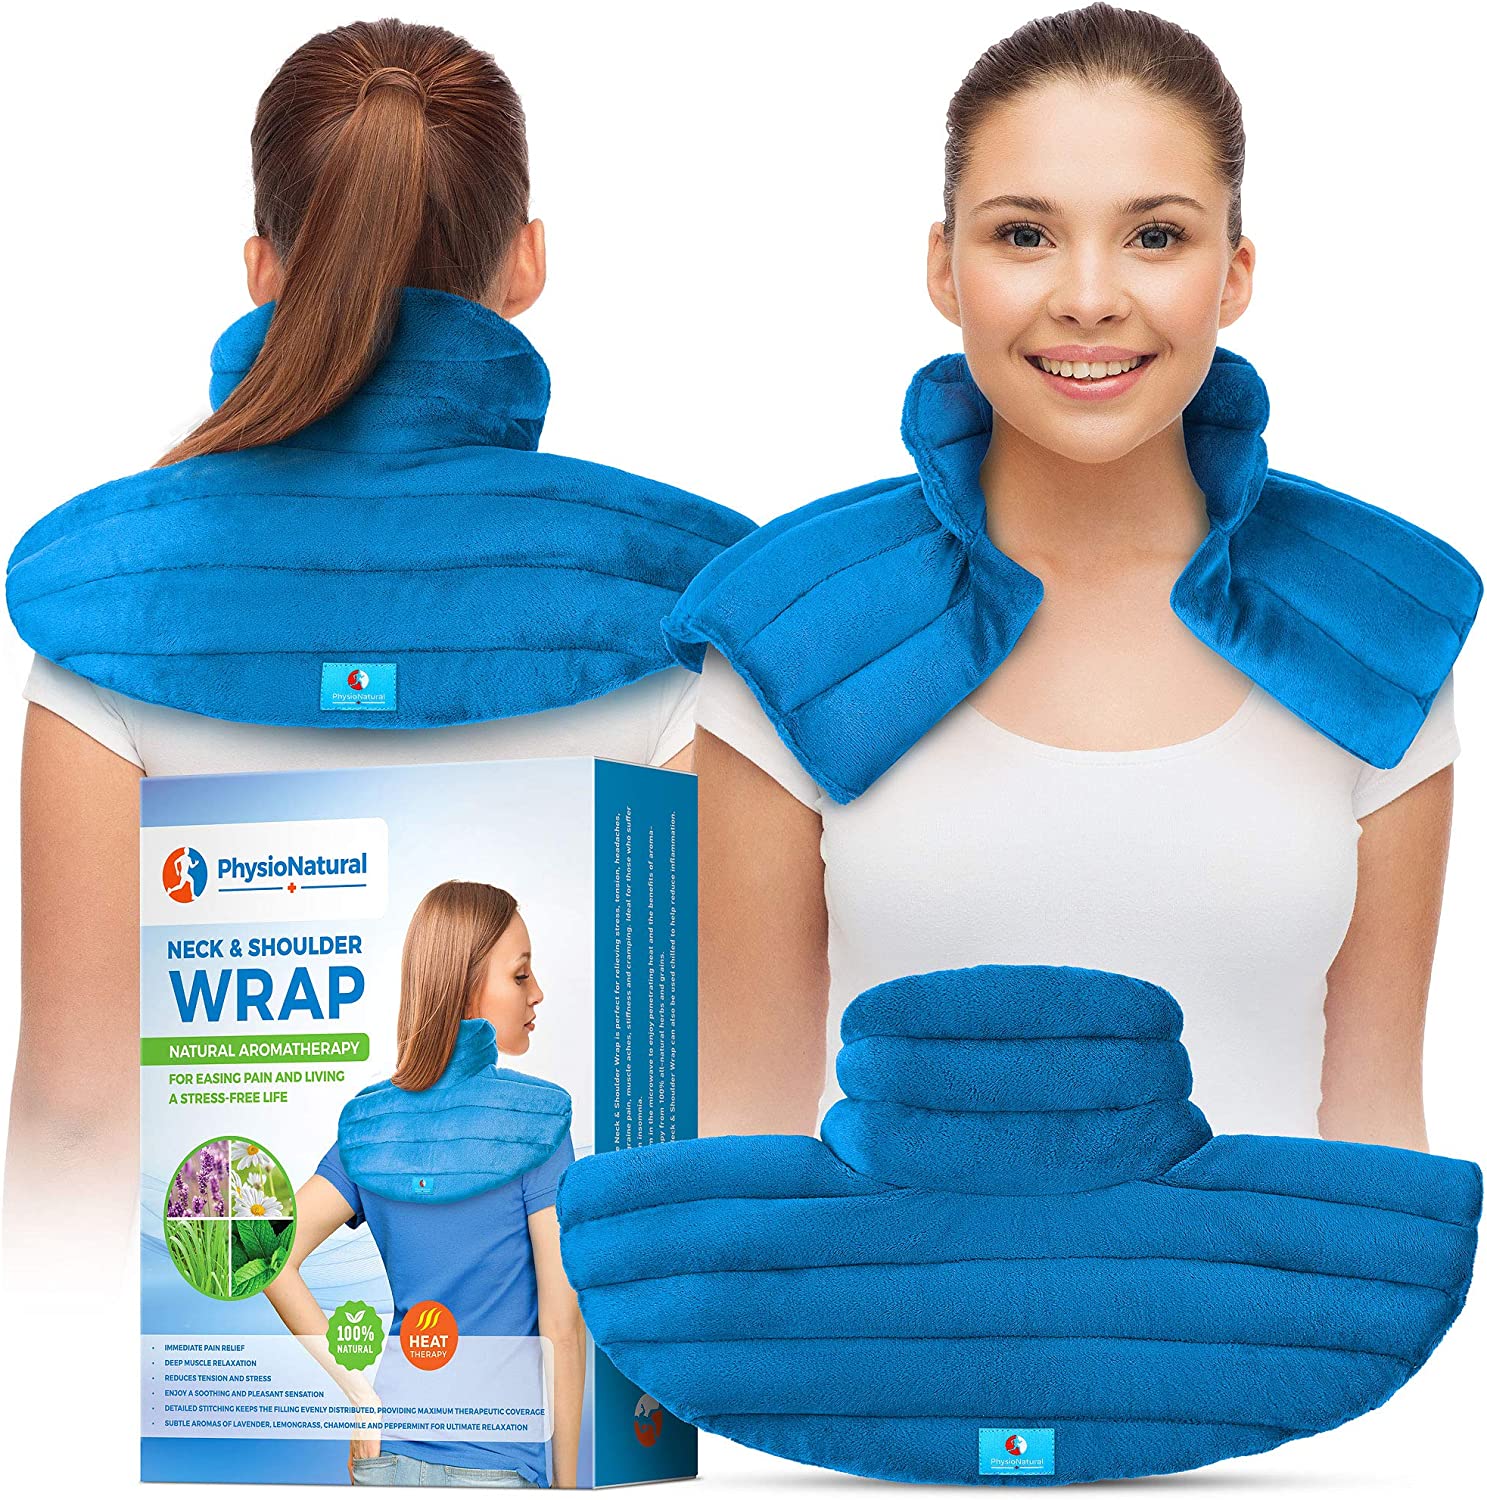 Review of Neck and Shoulder Wrap - Instant Relief for Tension and Stress